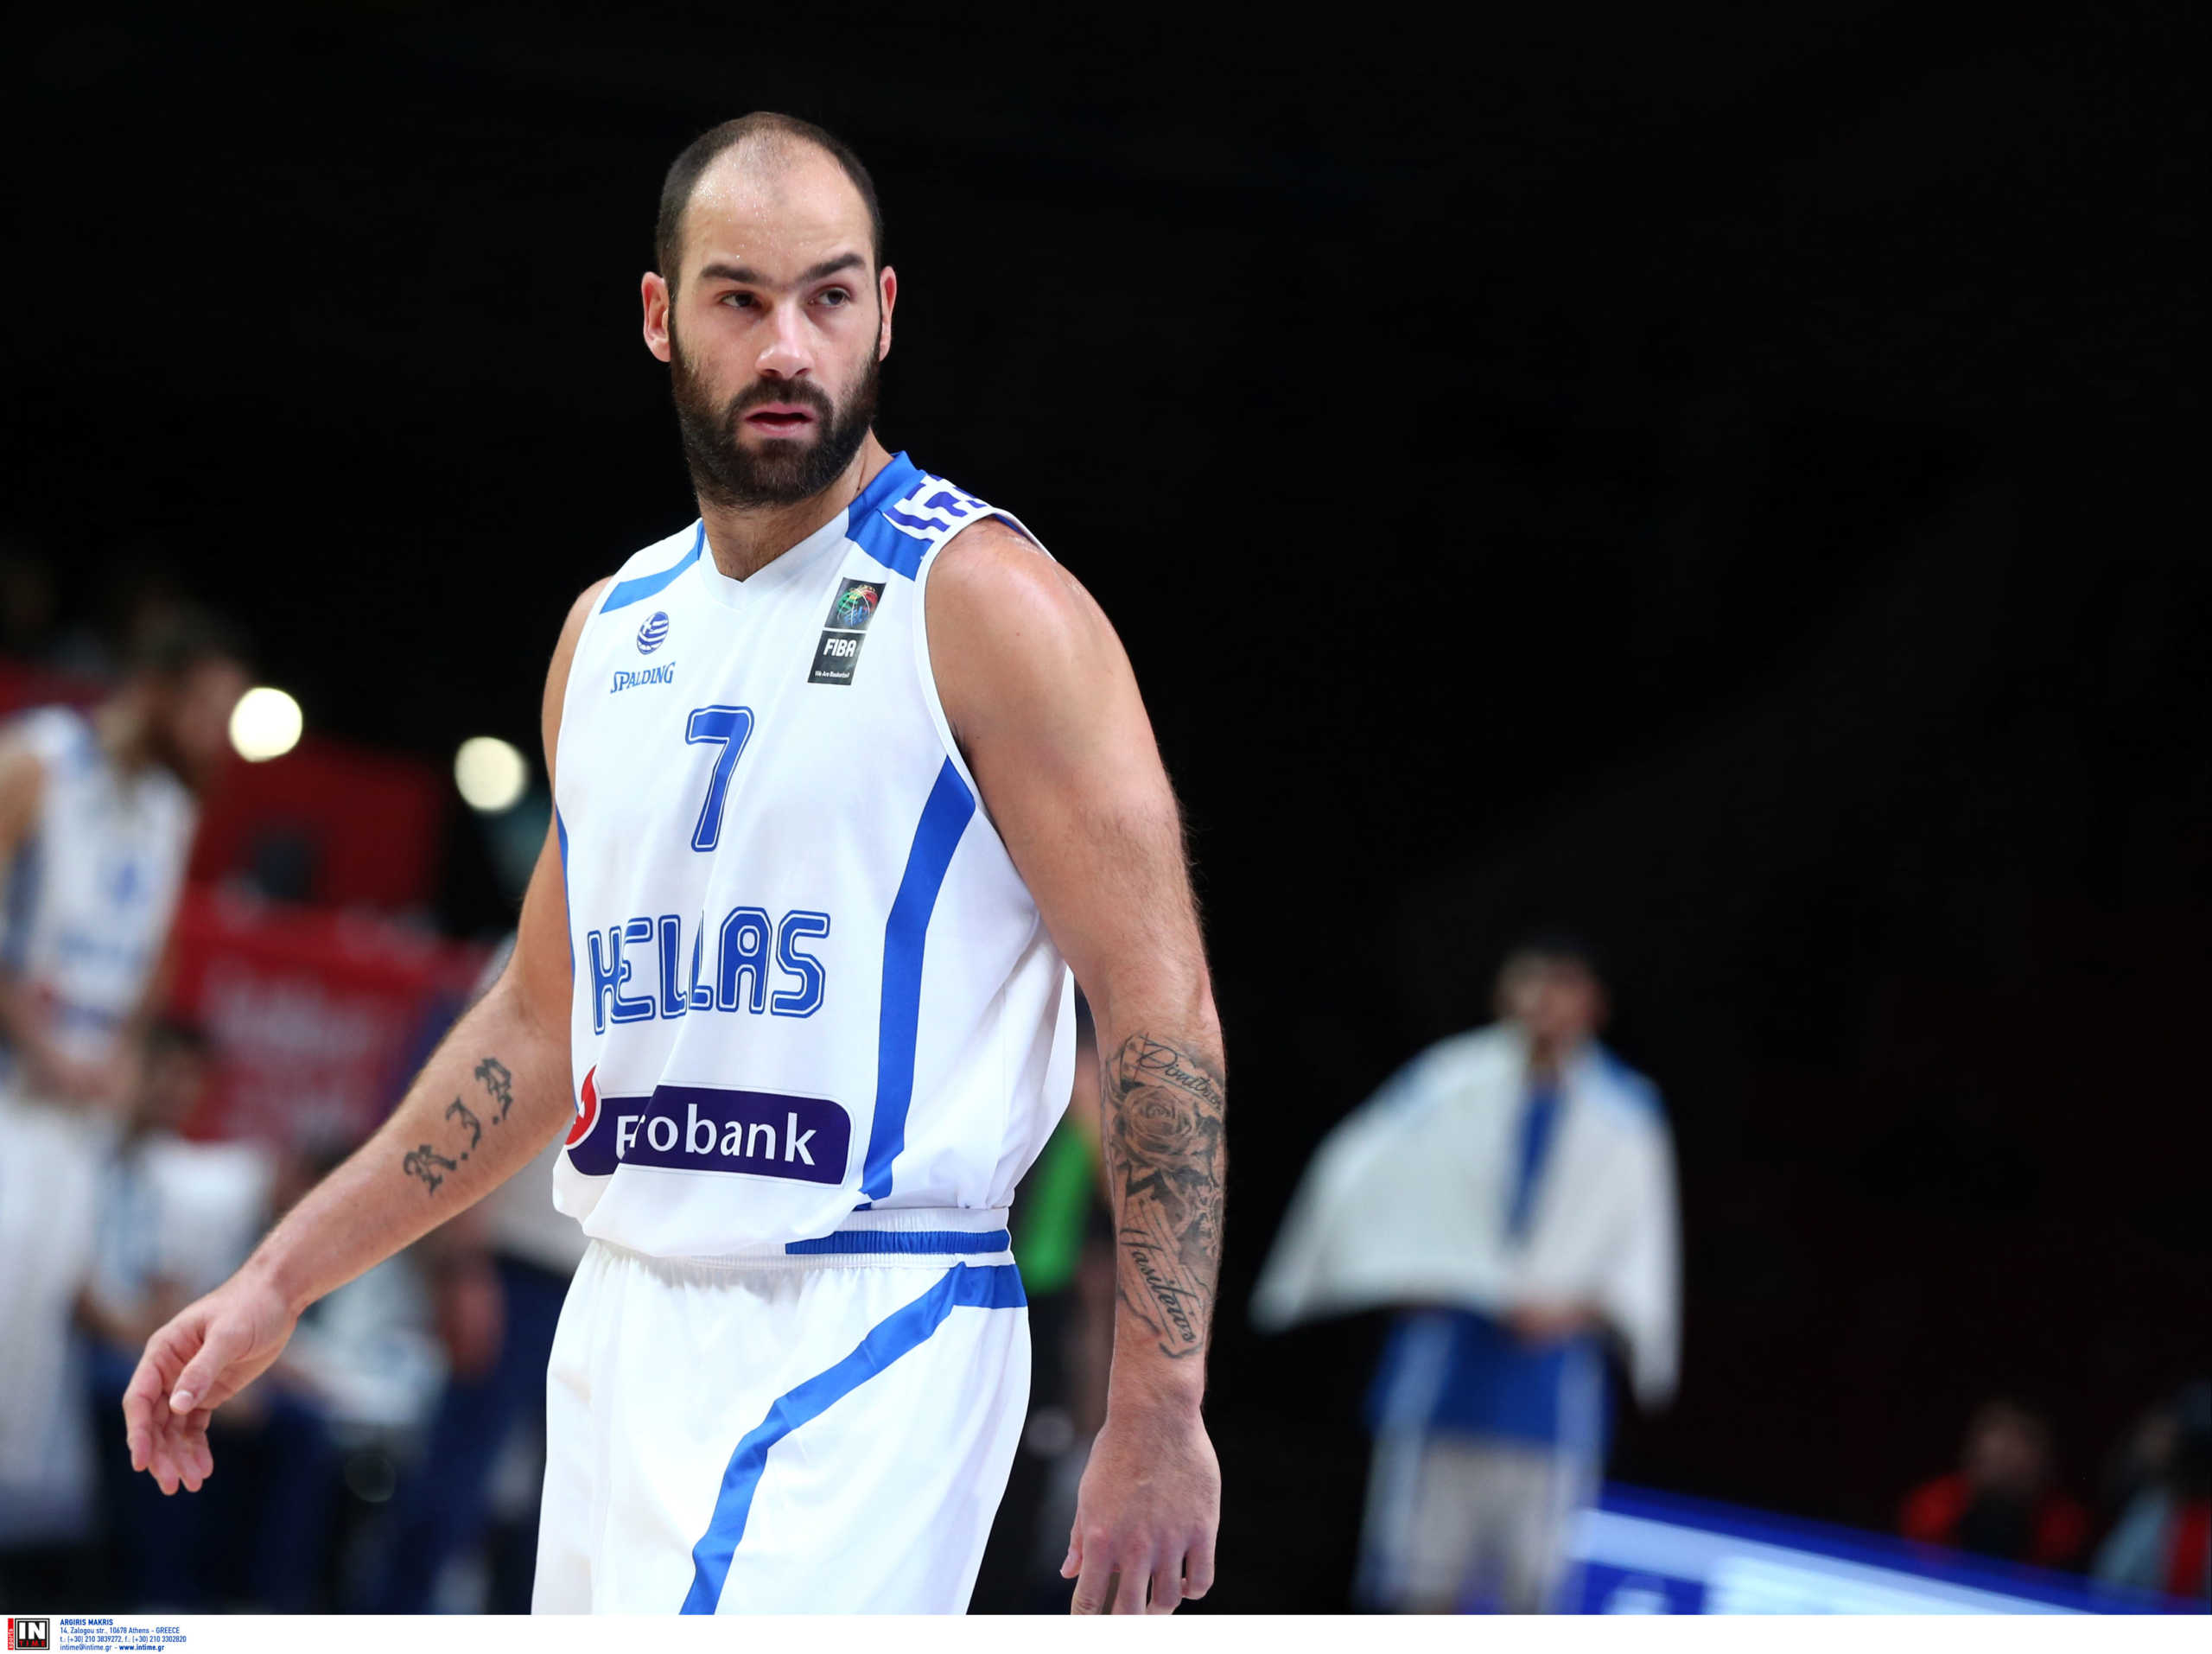 https://www.newsit.gr/wp-content/uploads/2020/05/SPANOULIS-scaled.jpg